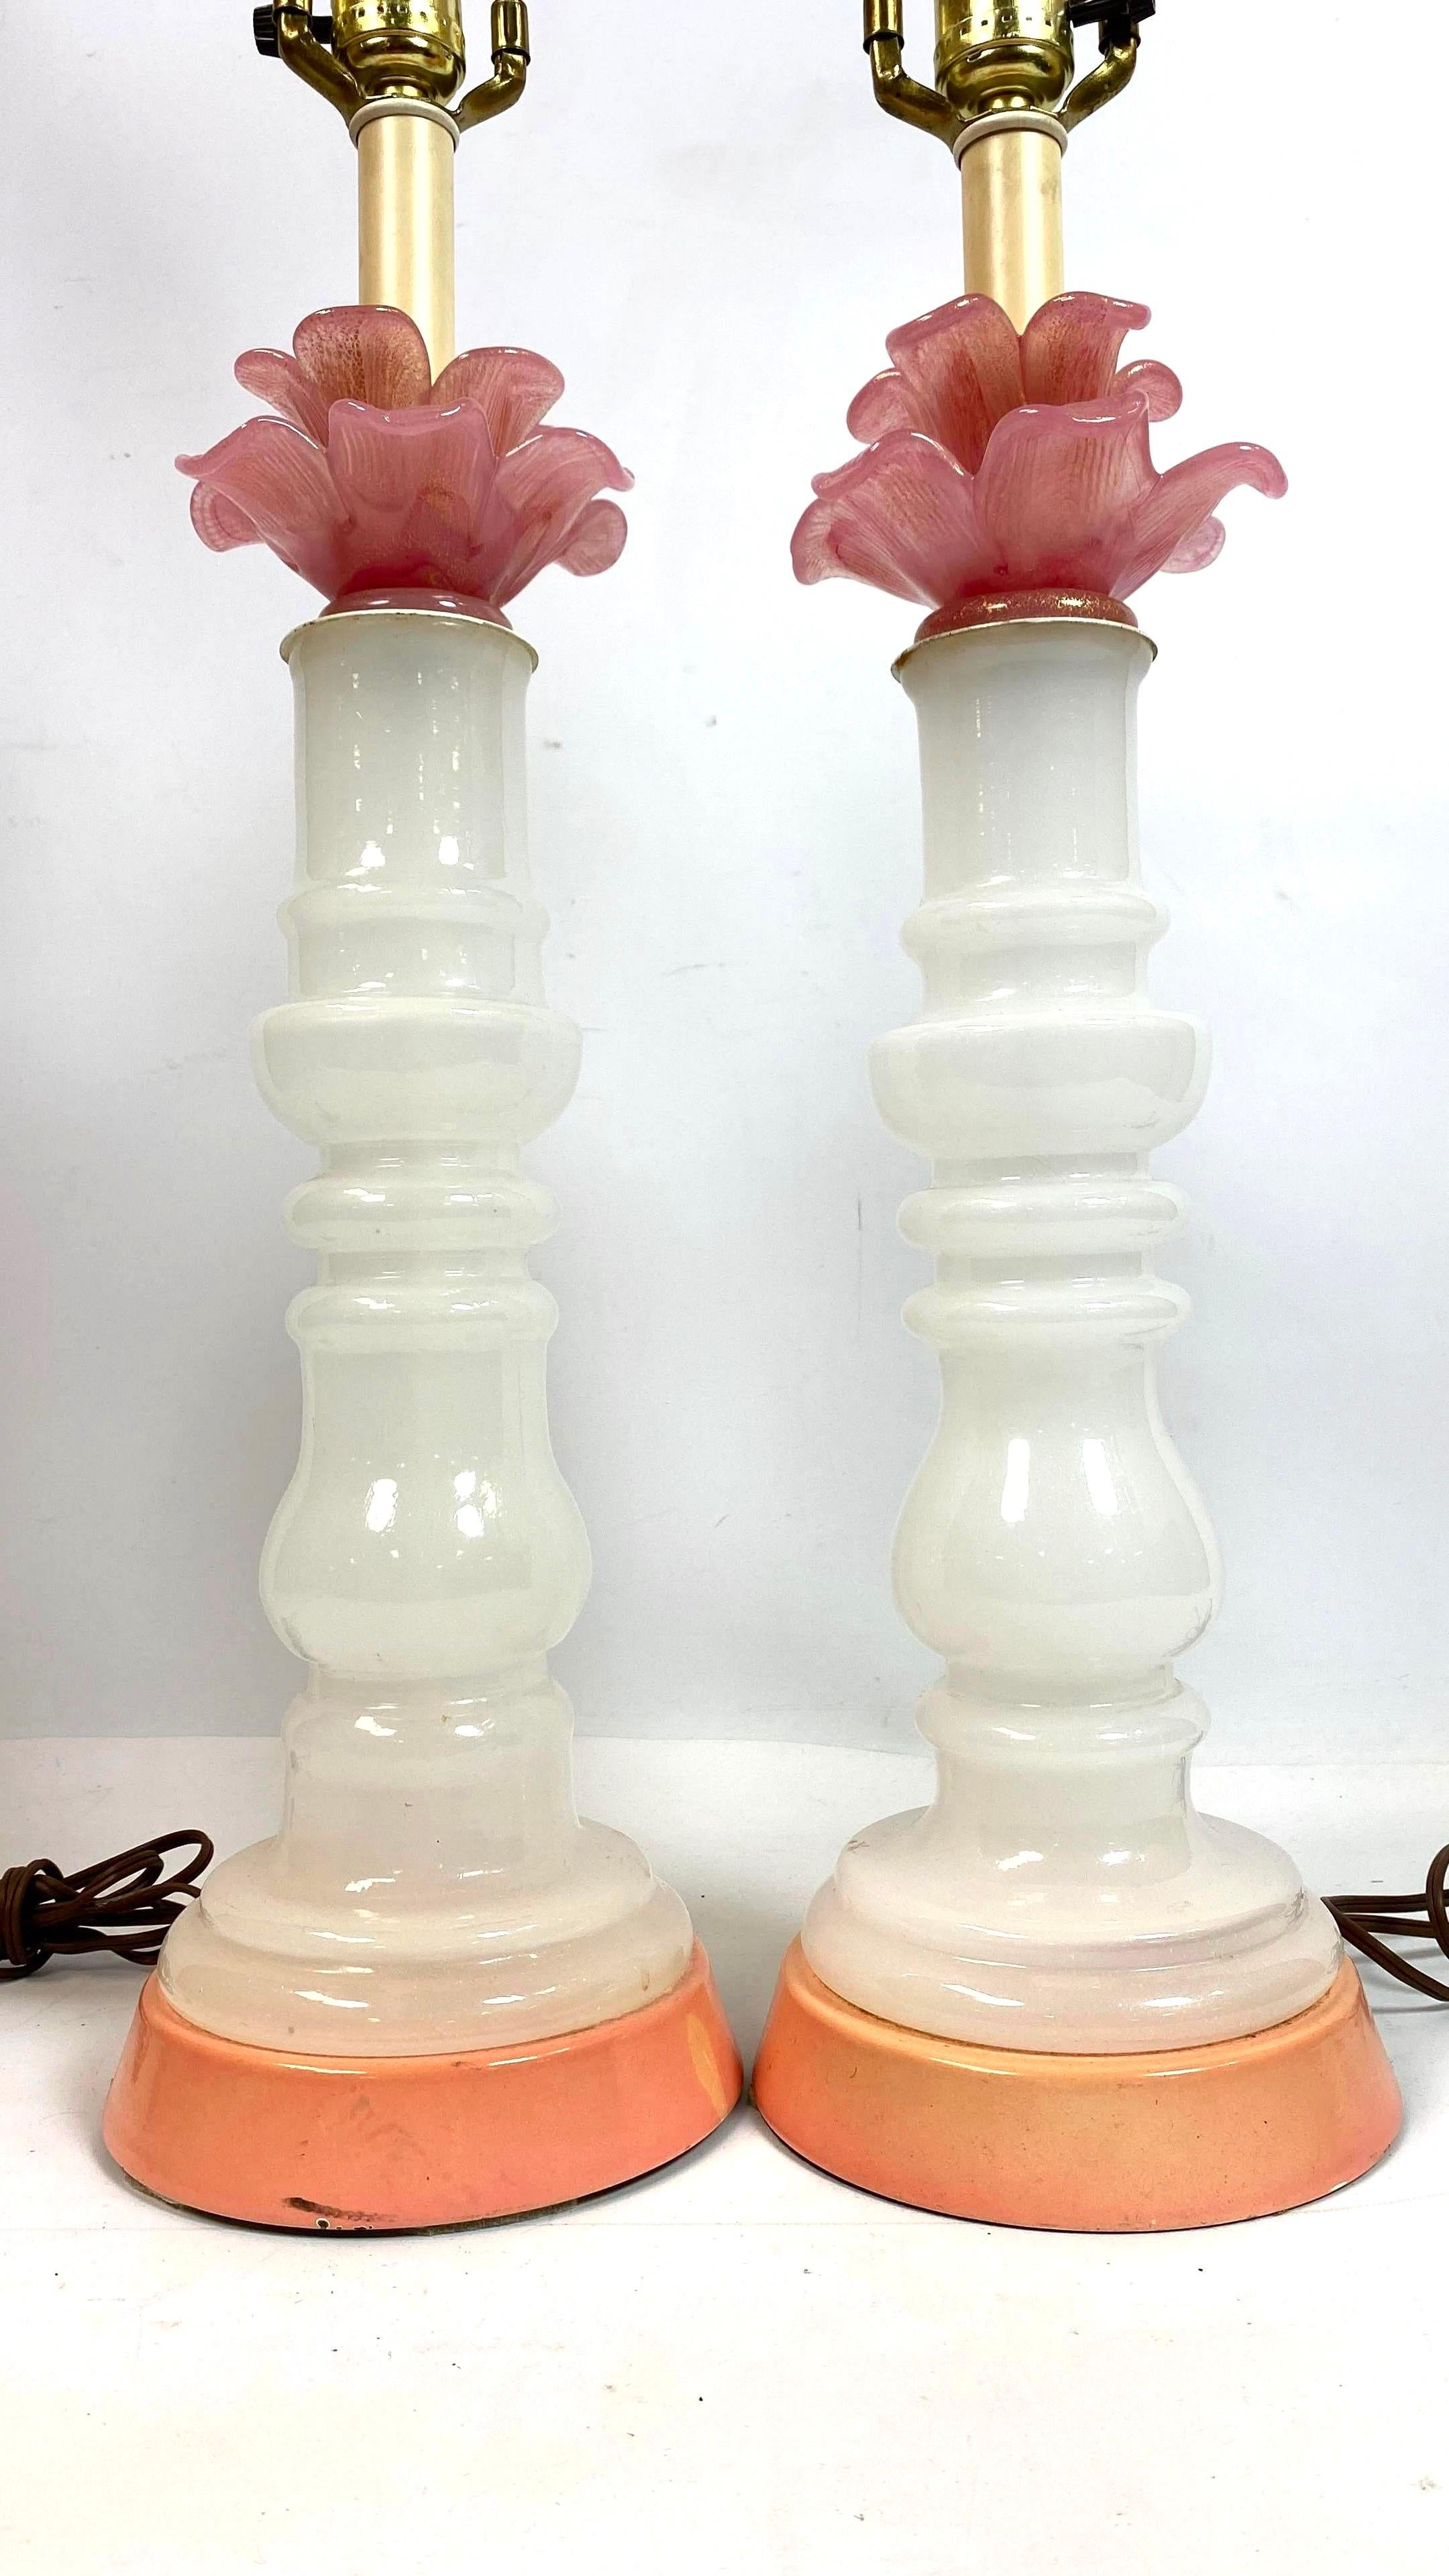 Murano art glass modern floral columnar pink and white milk glass table lamps. Lovely peach ceramic base. Milk glass shaft and Murano art glass pink floral top. Shades for display only. Not included. Sold as a pair.